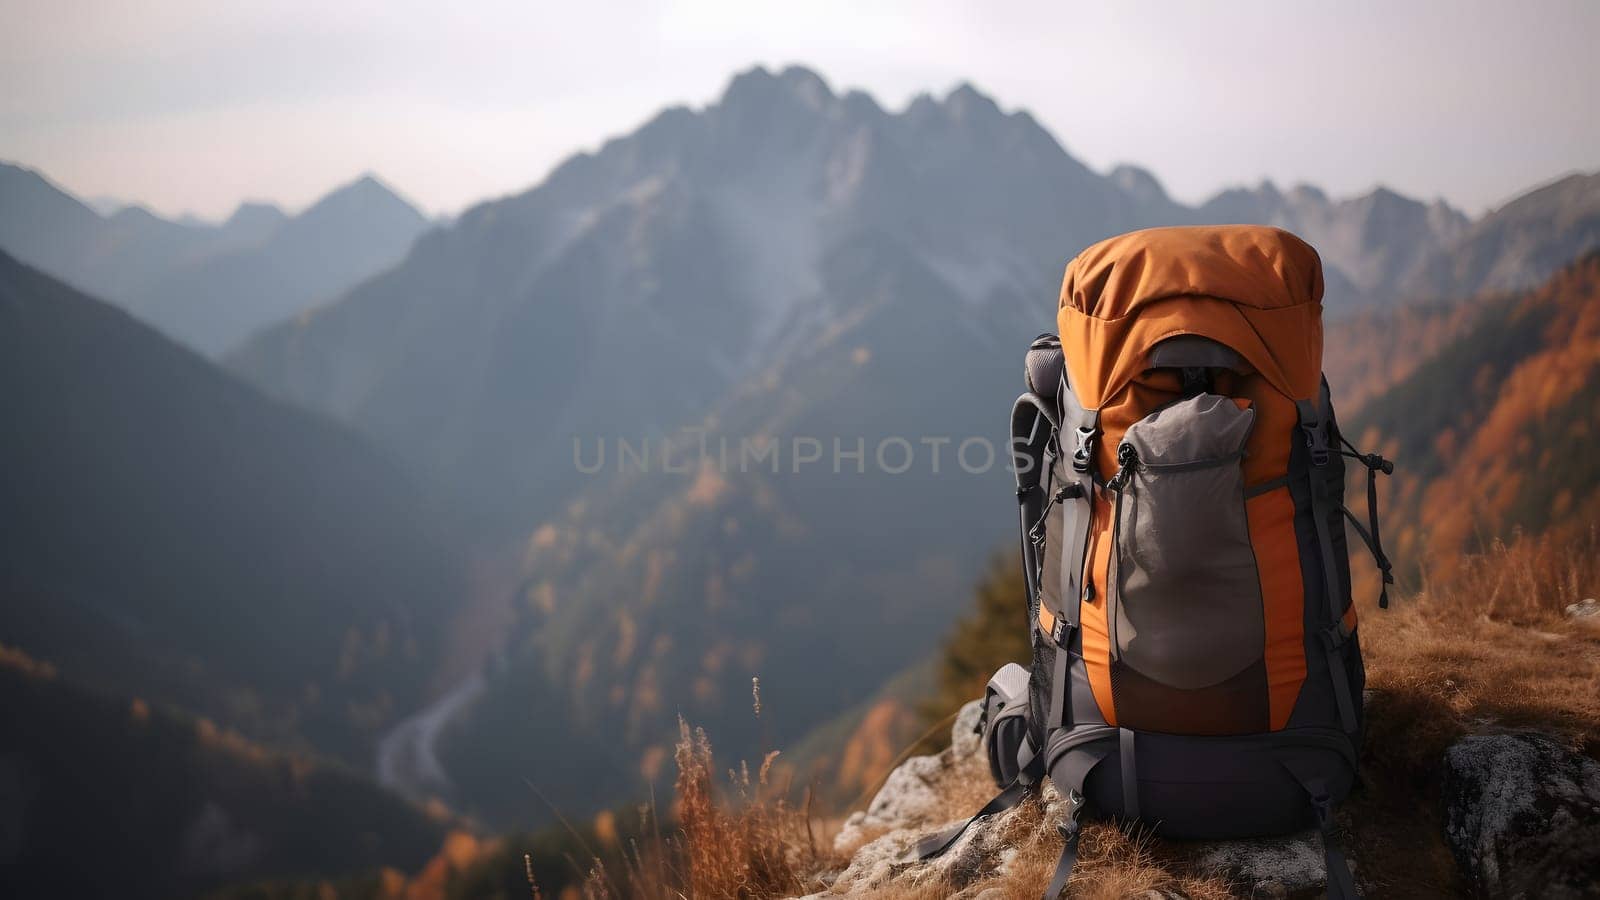 Big hiking and trekking backpack with blurred mountains in the background, neural network generated picture by z1b